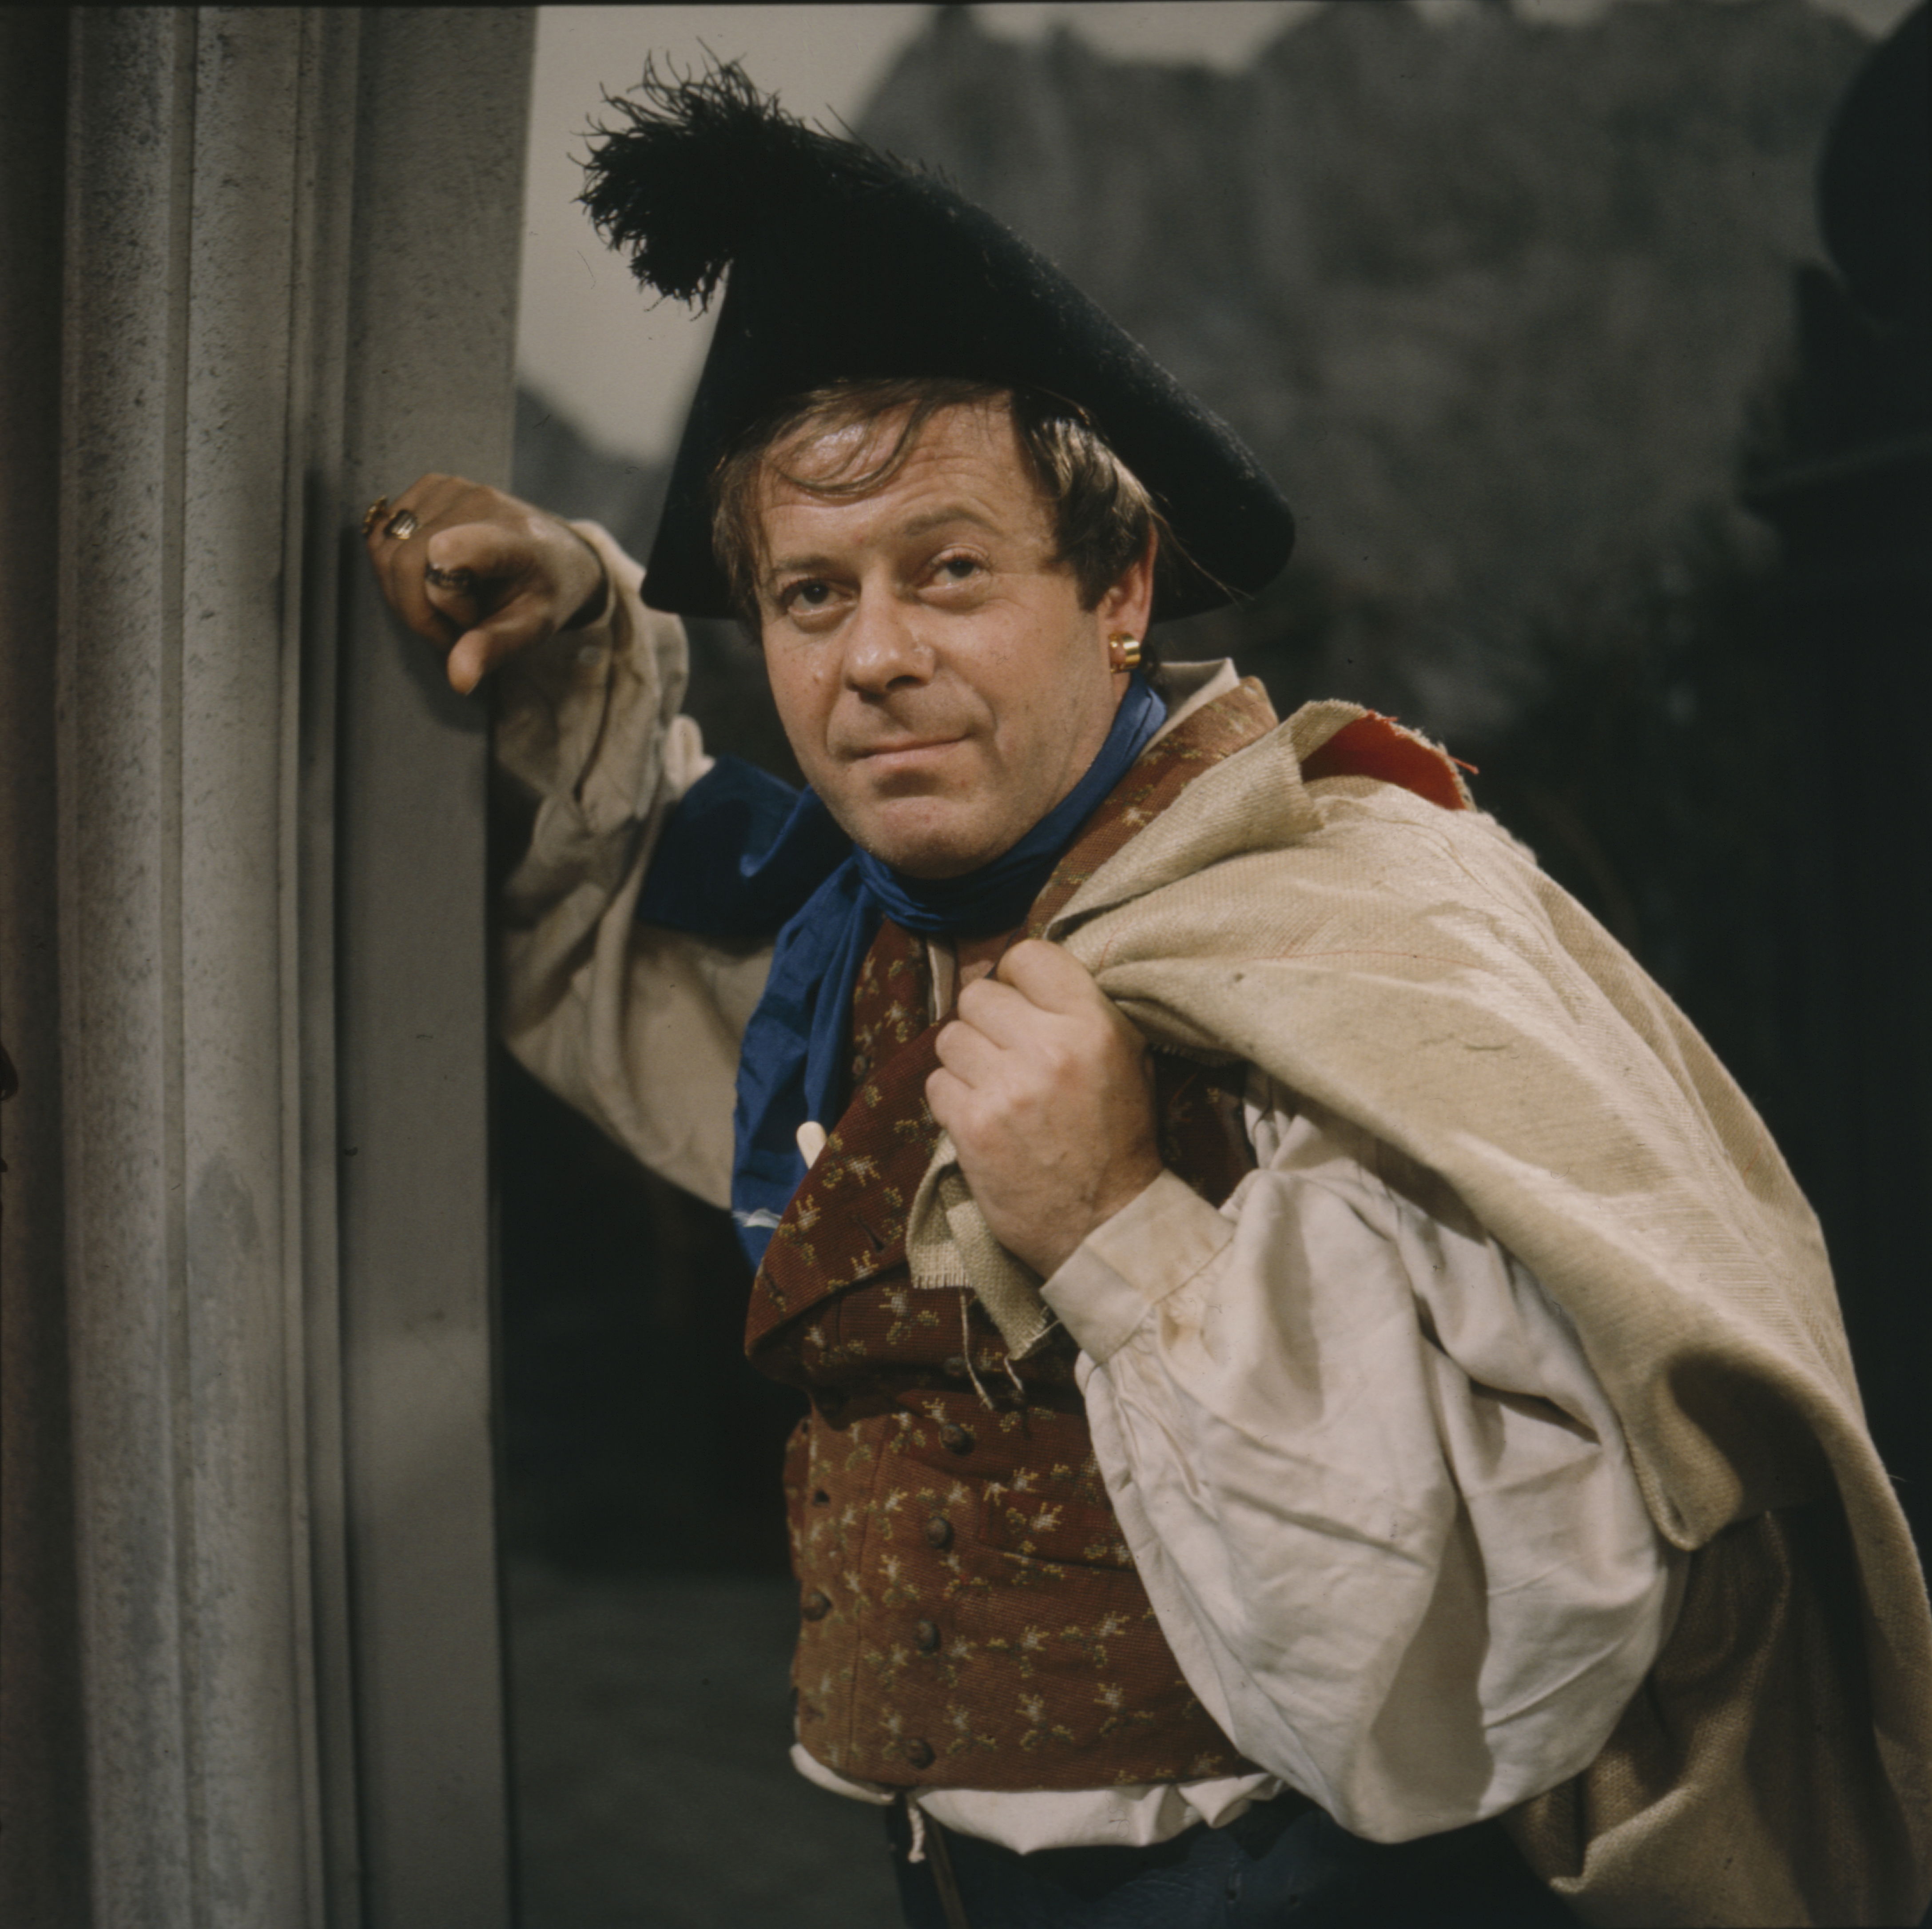 British actor Aubrey Morris pictured in a scene from the television drama 'Carmilla' in 1967. (Popperfoto/Getty Images)